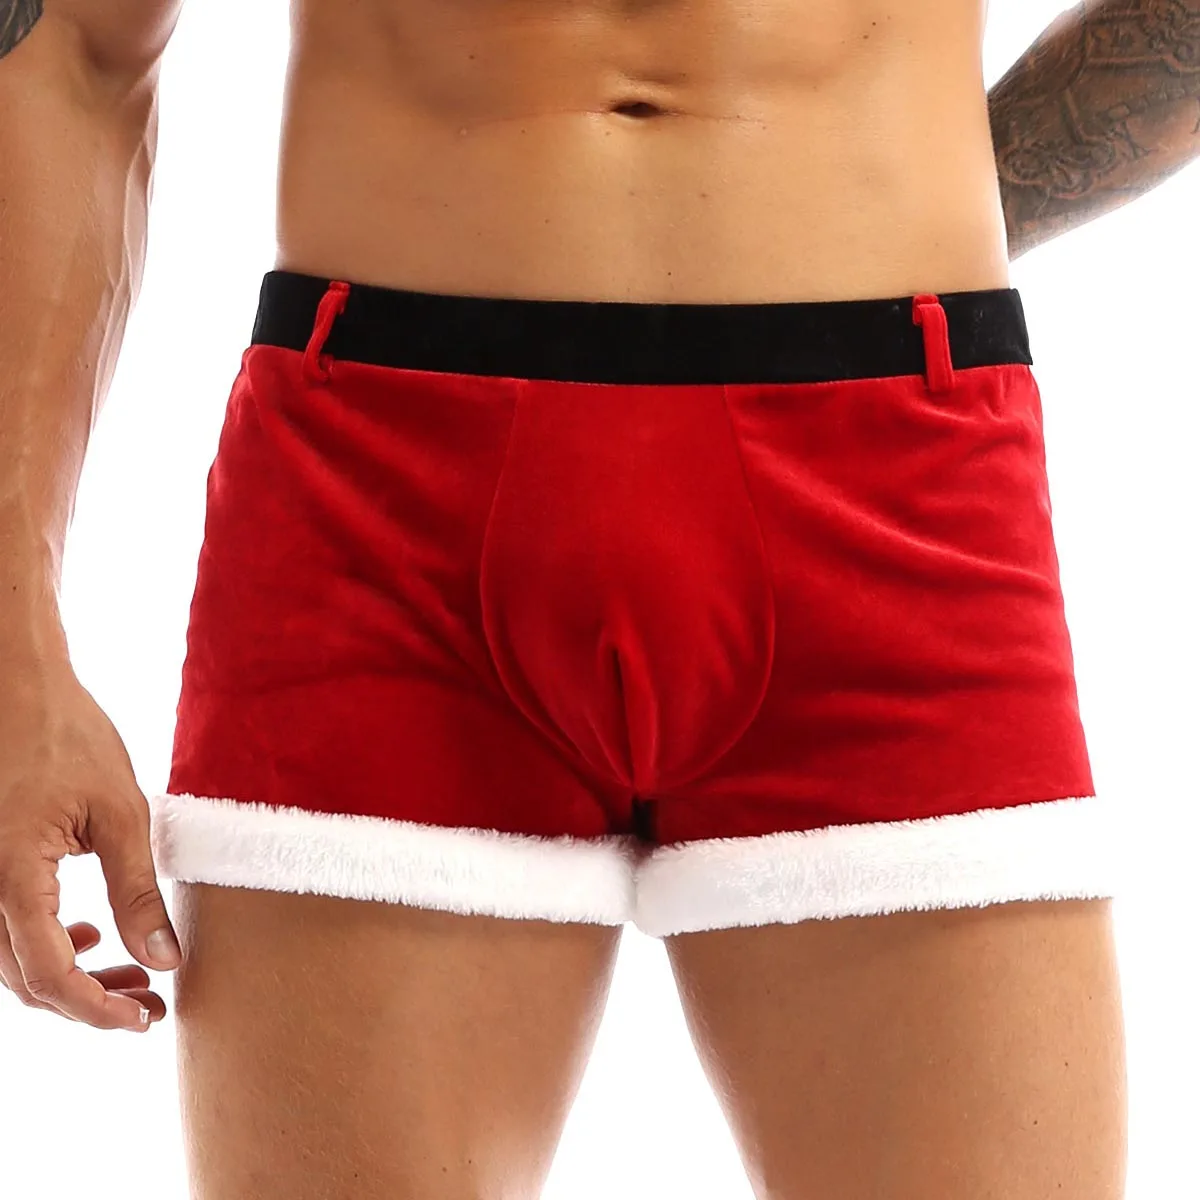 Men's Christmas Holiday Fancy Boxer Shorts Santa Cosplay Trunks Underwear Red 